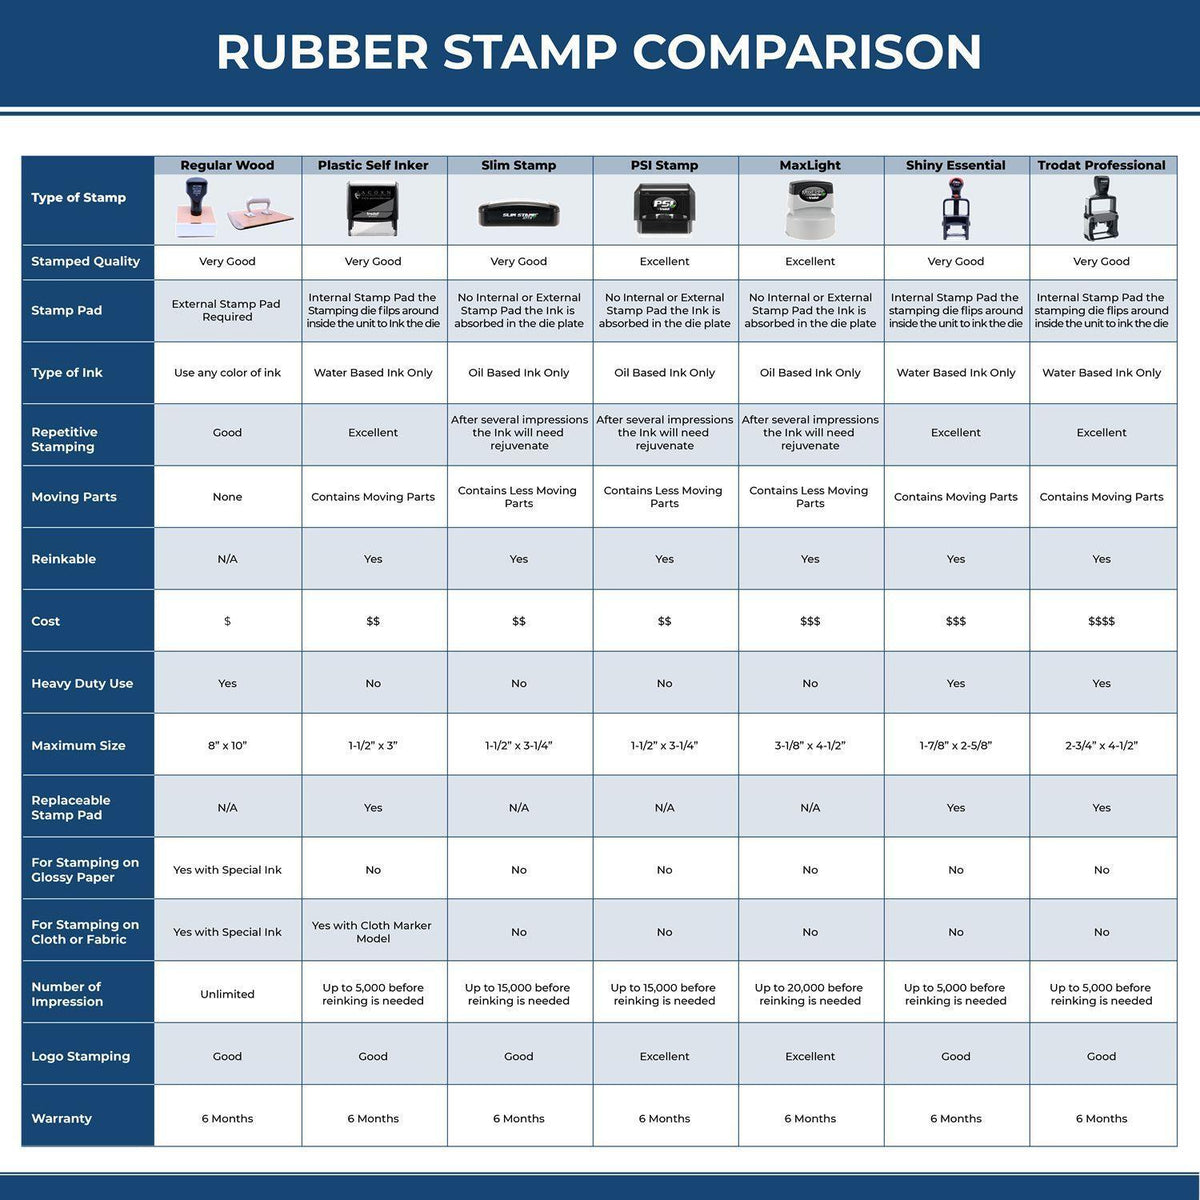 Large No Insurance Rubber Stamp 4510R Rubber Stamp Comparison